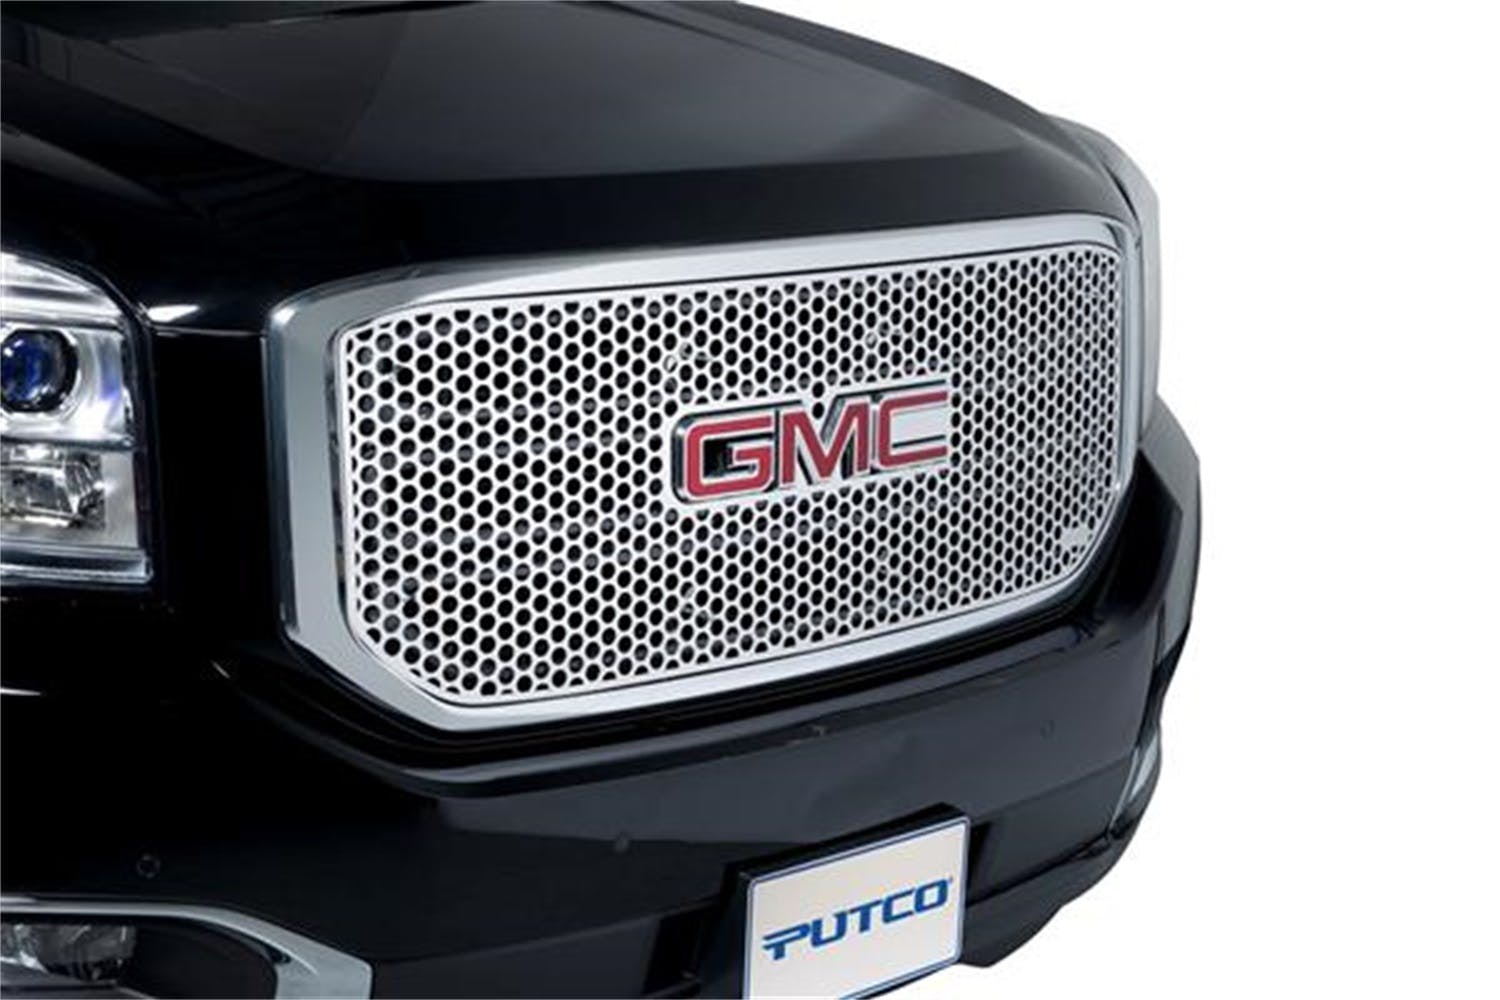 Putco 84204 Punch Stainless Steel Grilles